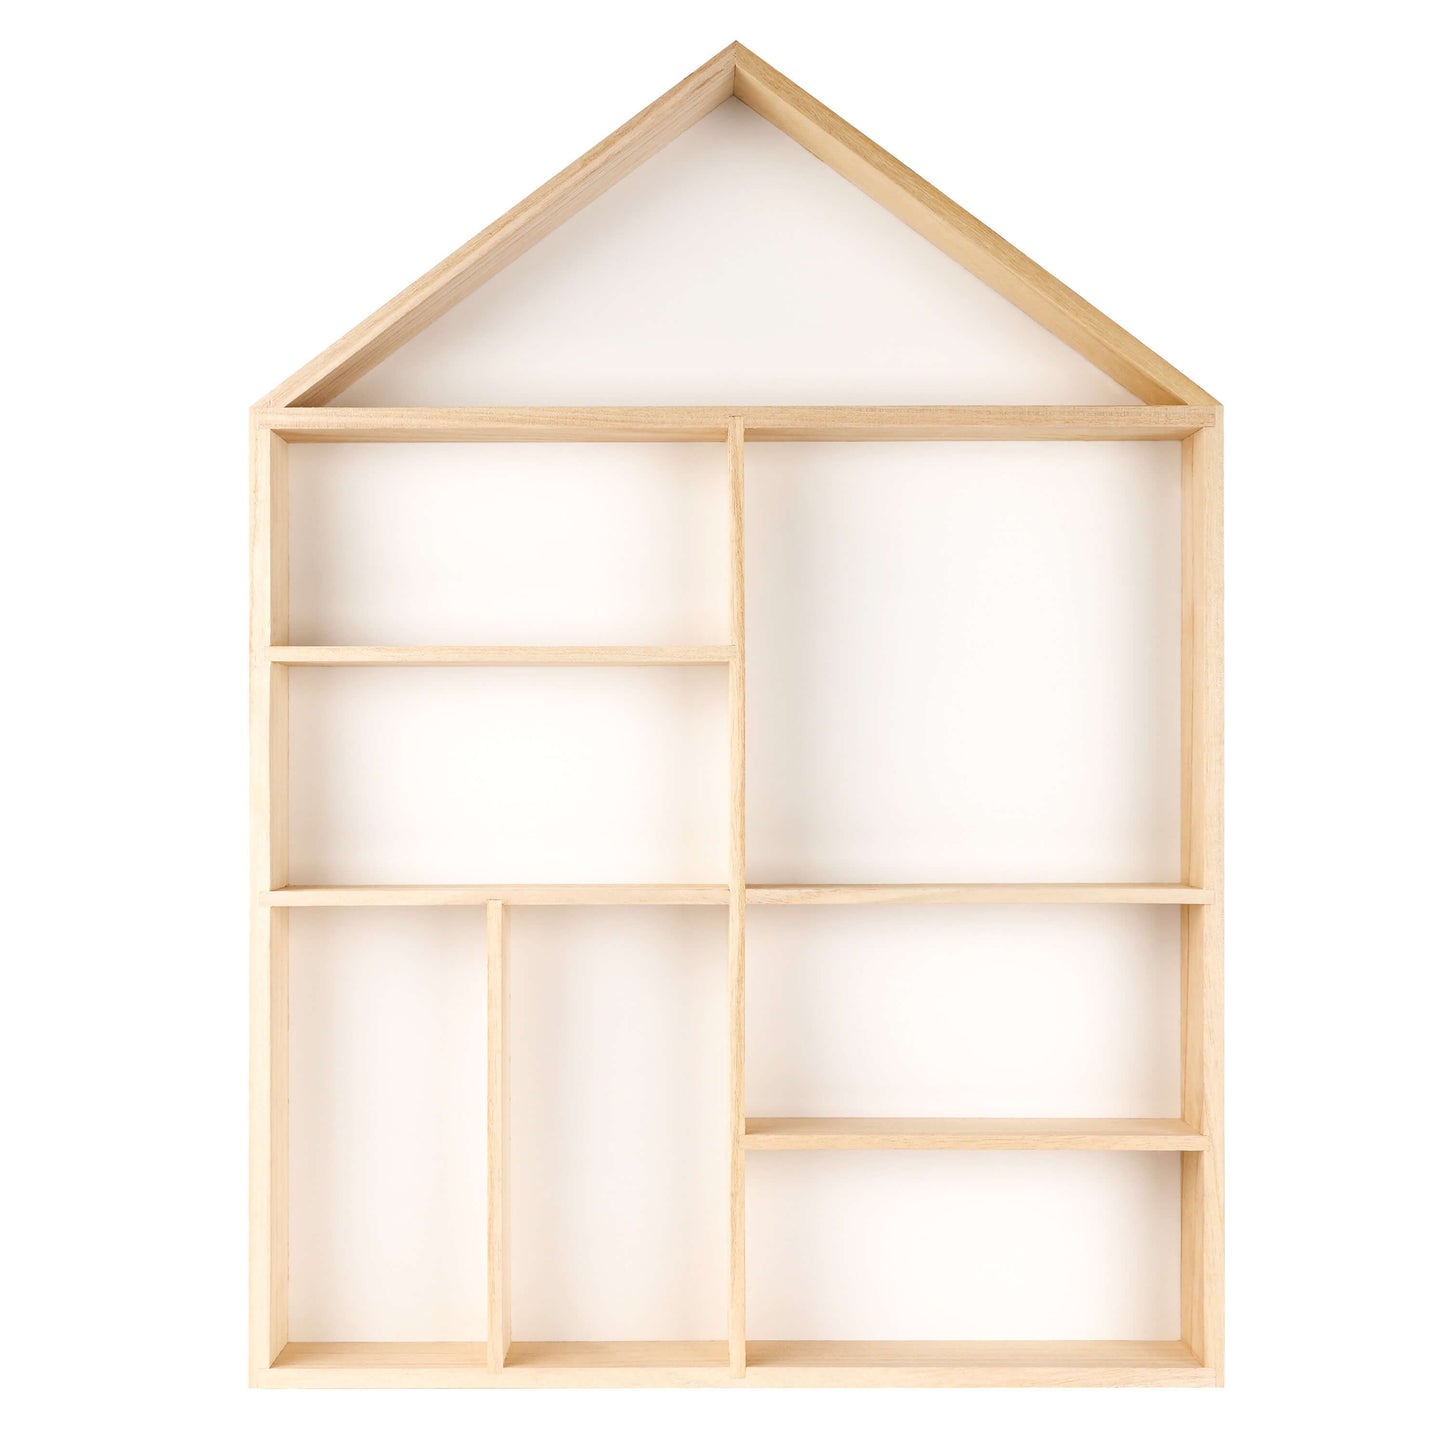 House shaped wooden toy display shelf with a white-colored backboard ( Empty, front view)